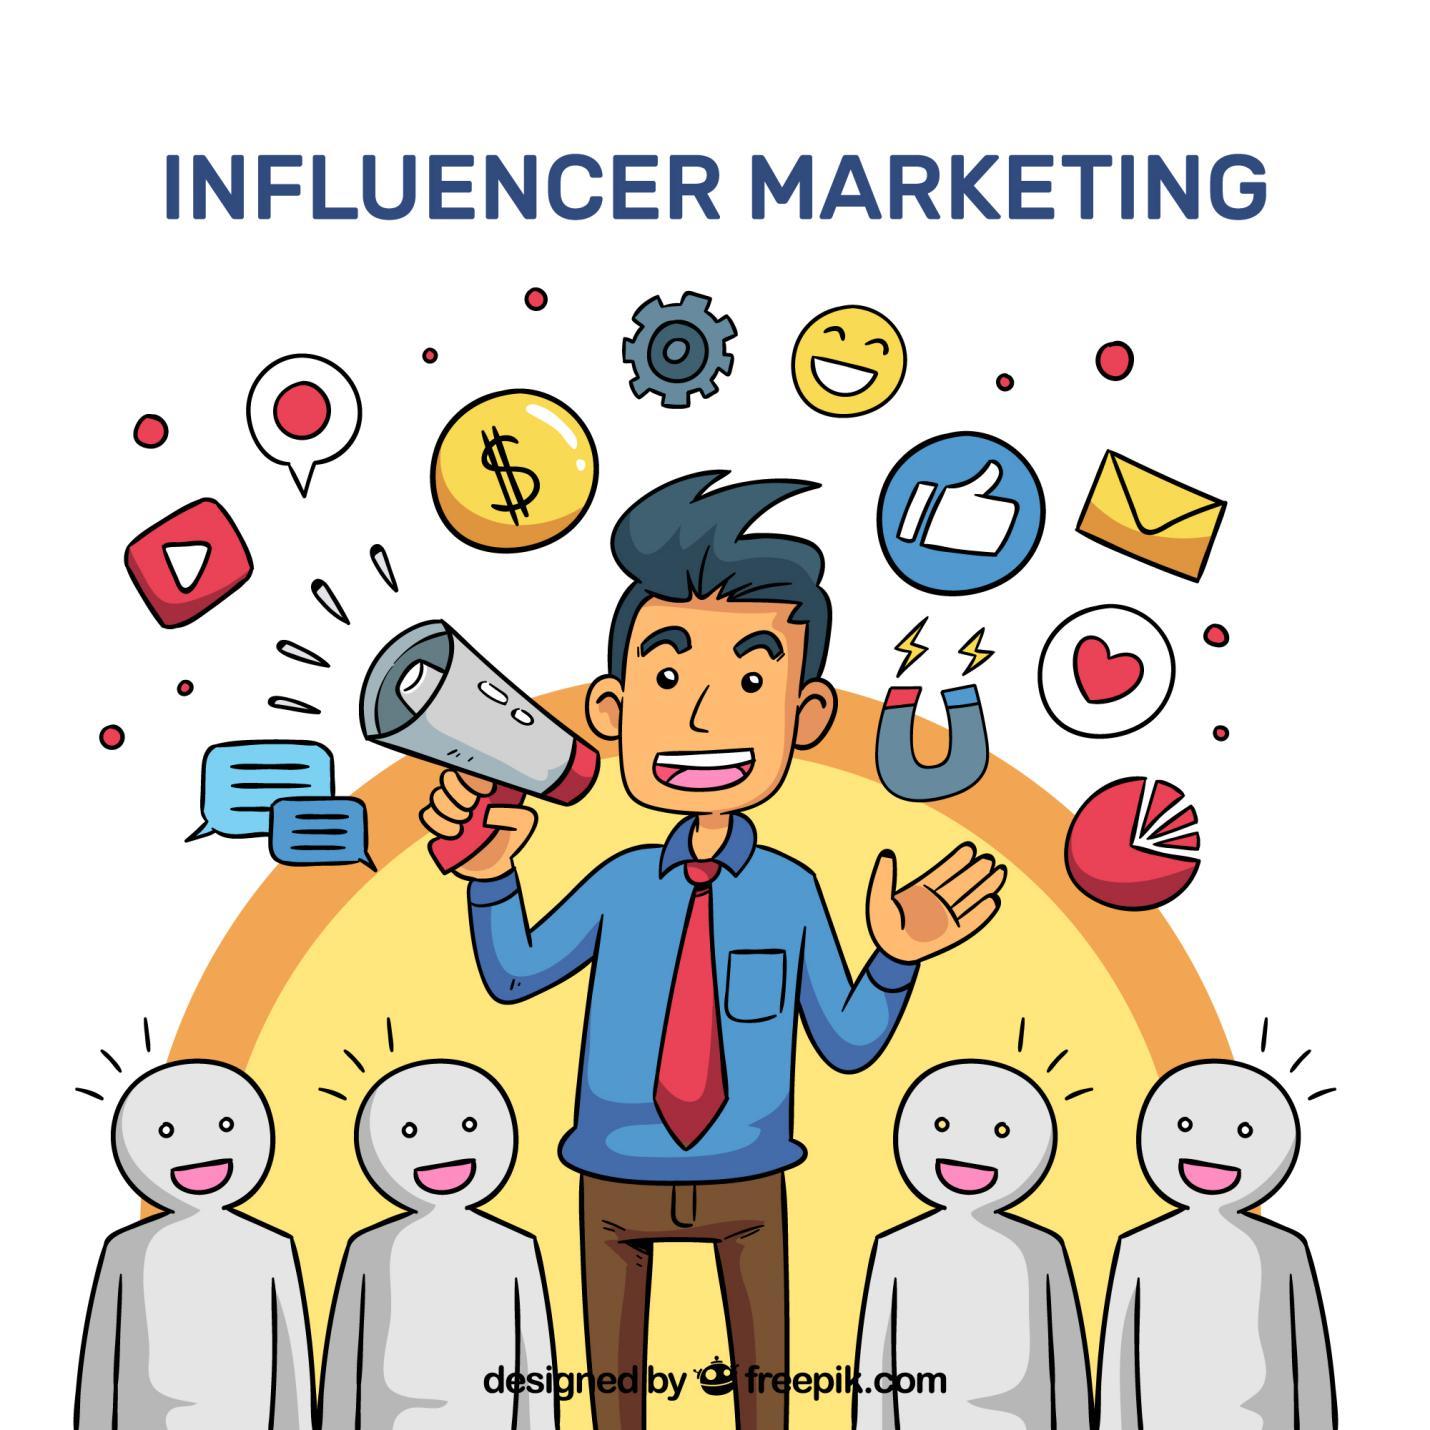 Why You Should Consider Adding Influencer Marketing to Your Business